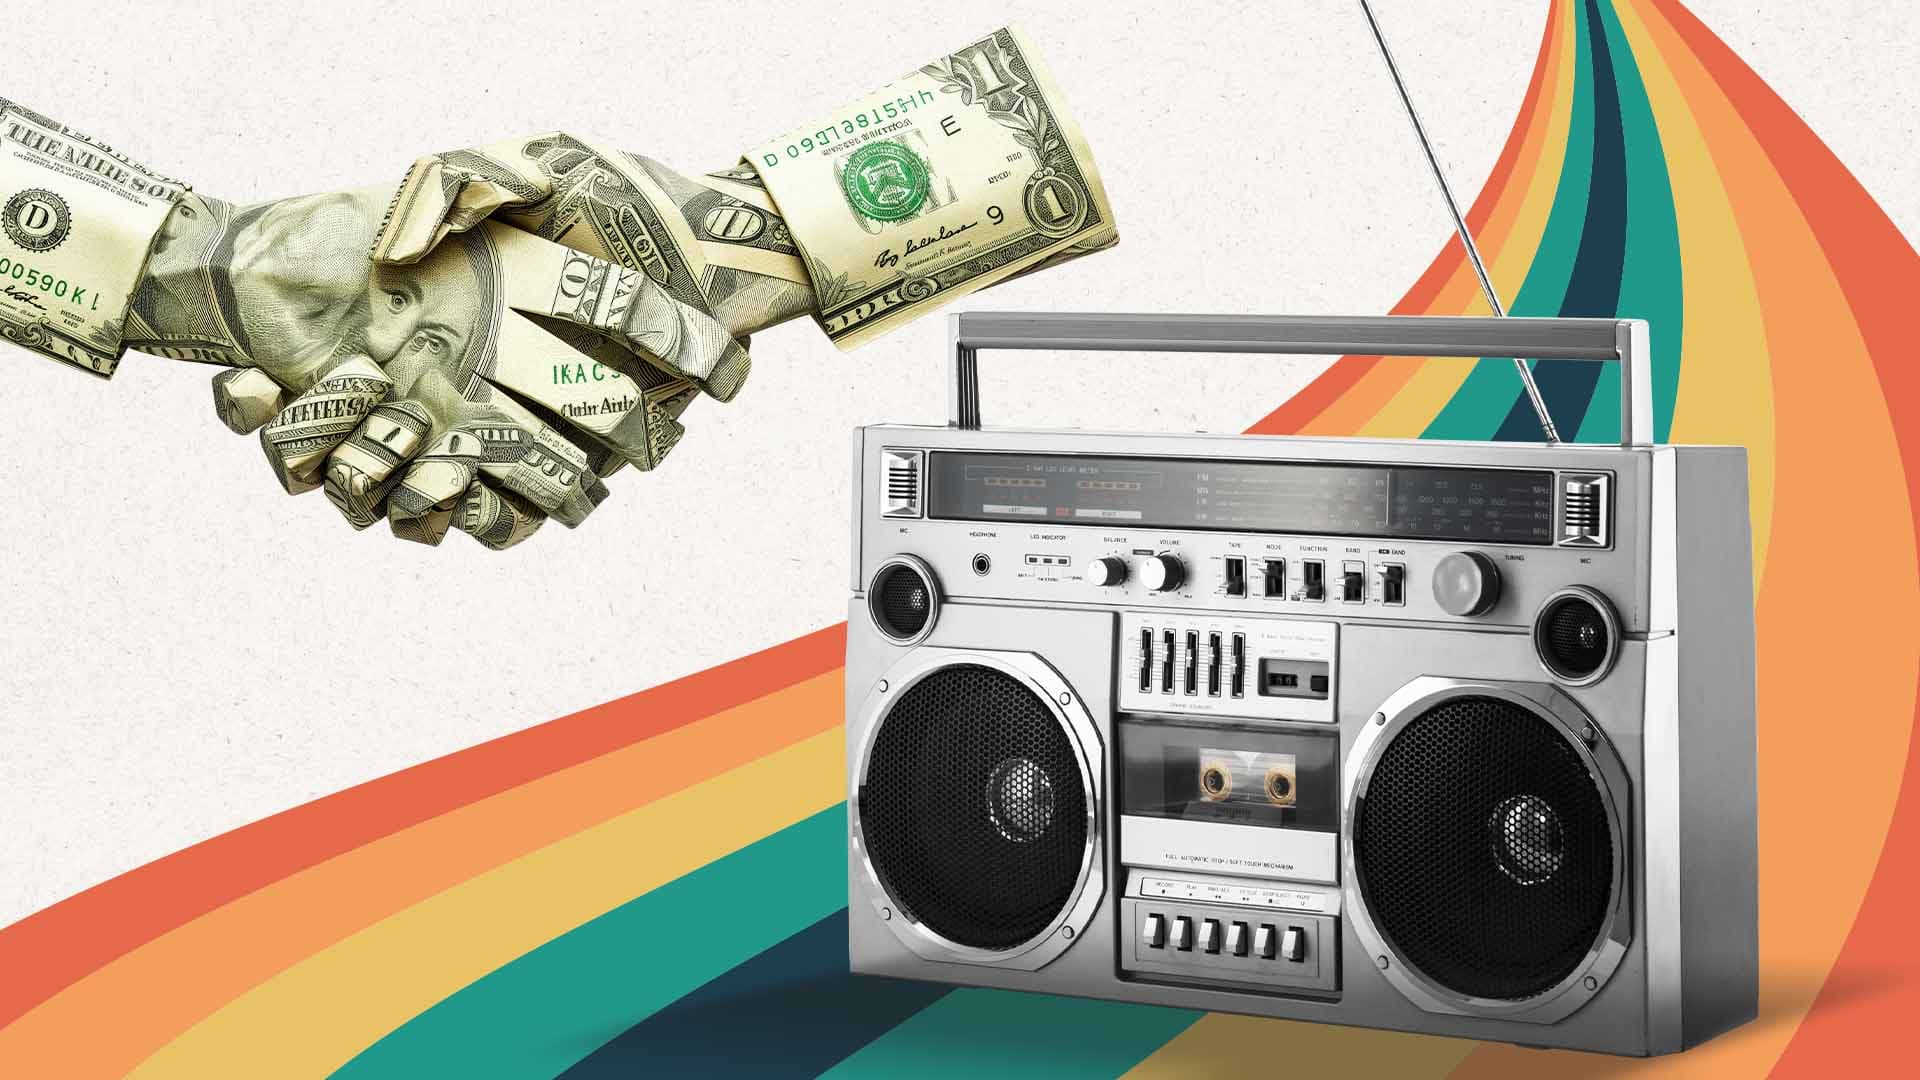 Image of boombox floating on rainbow with hands made out of money shaking.